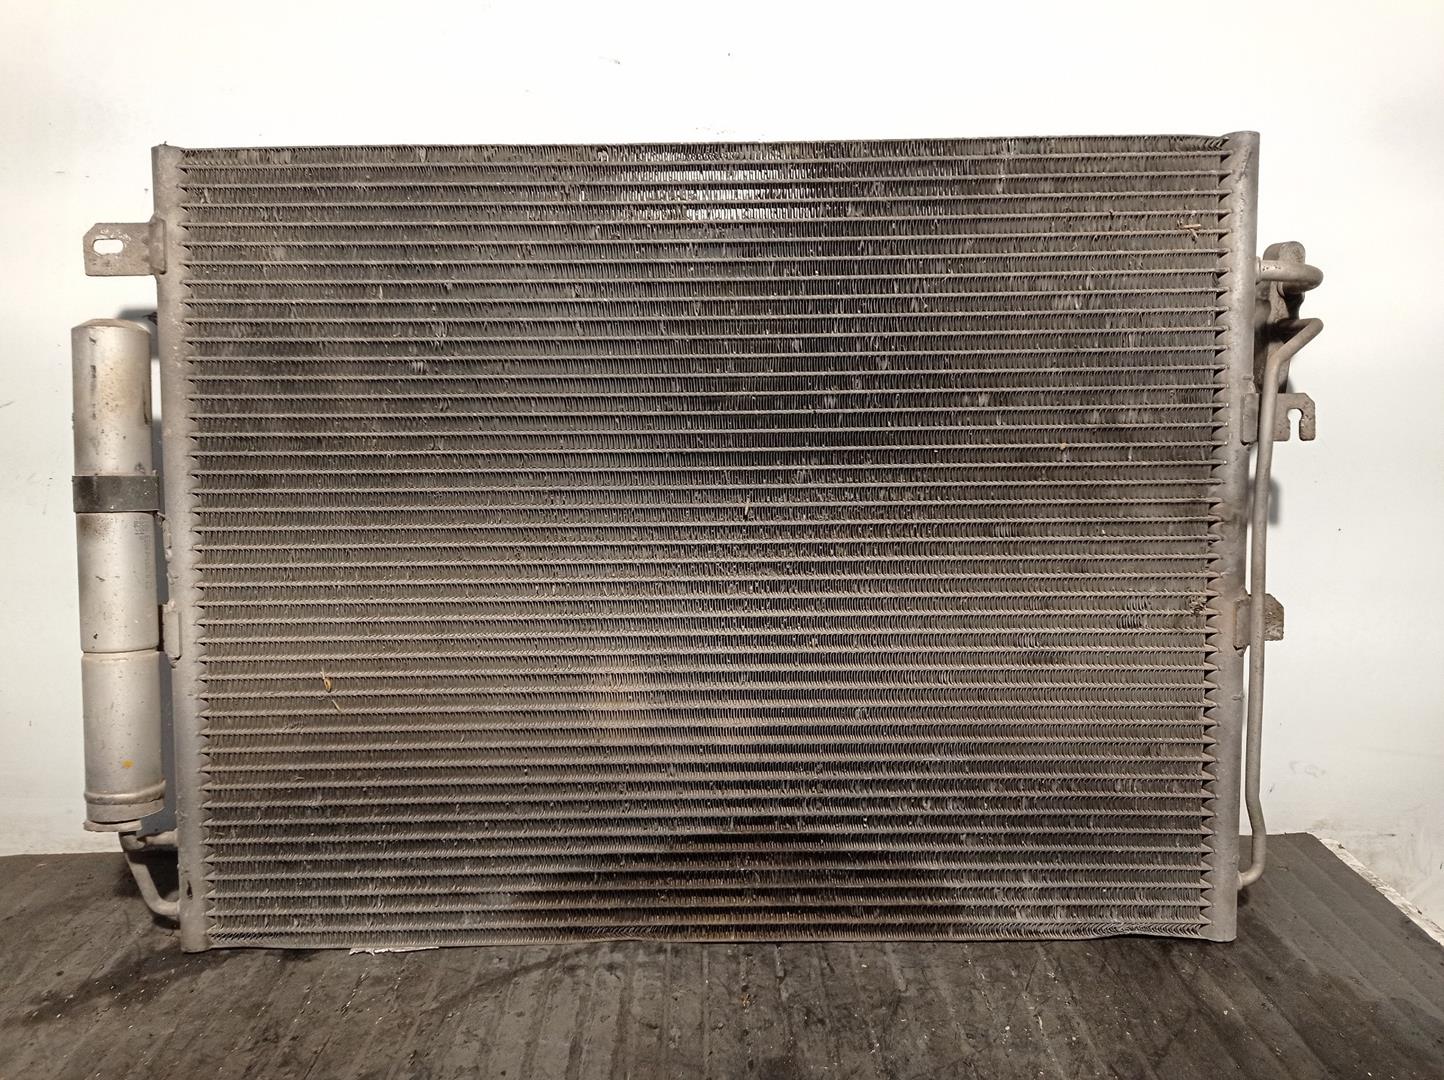 LAND ROVER Discovery 3 generation (2004-2009) Air Con Radiator ED86165400 23856823